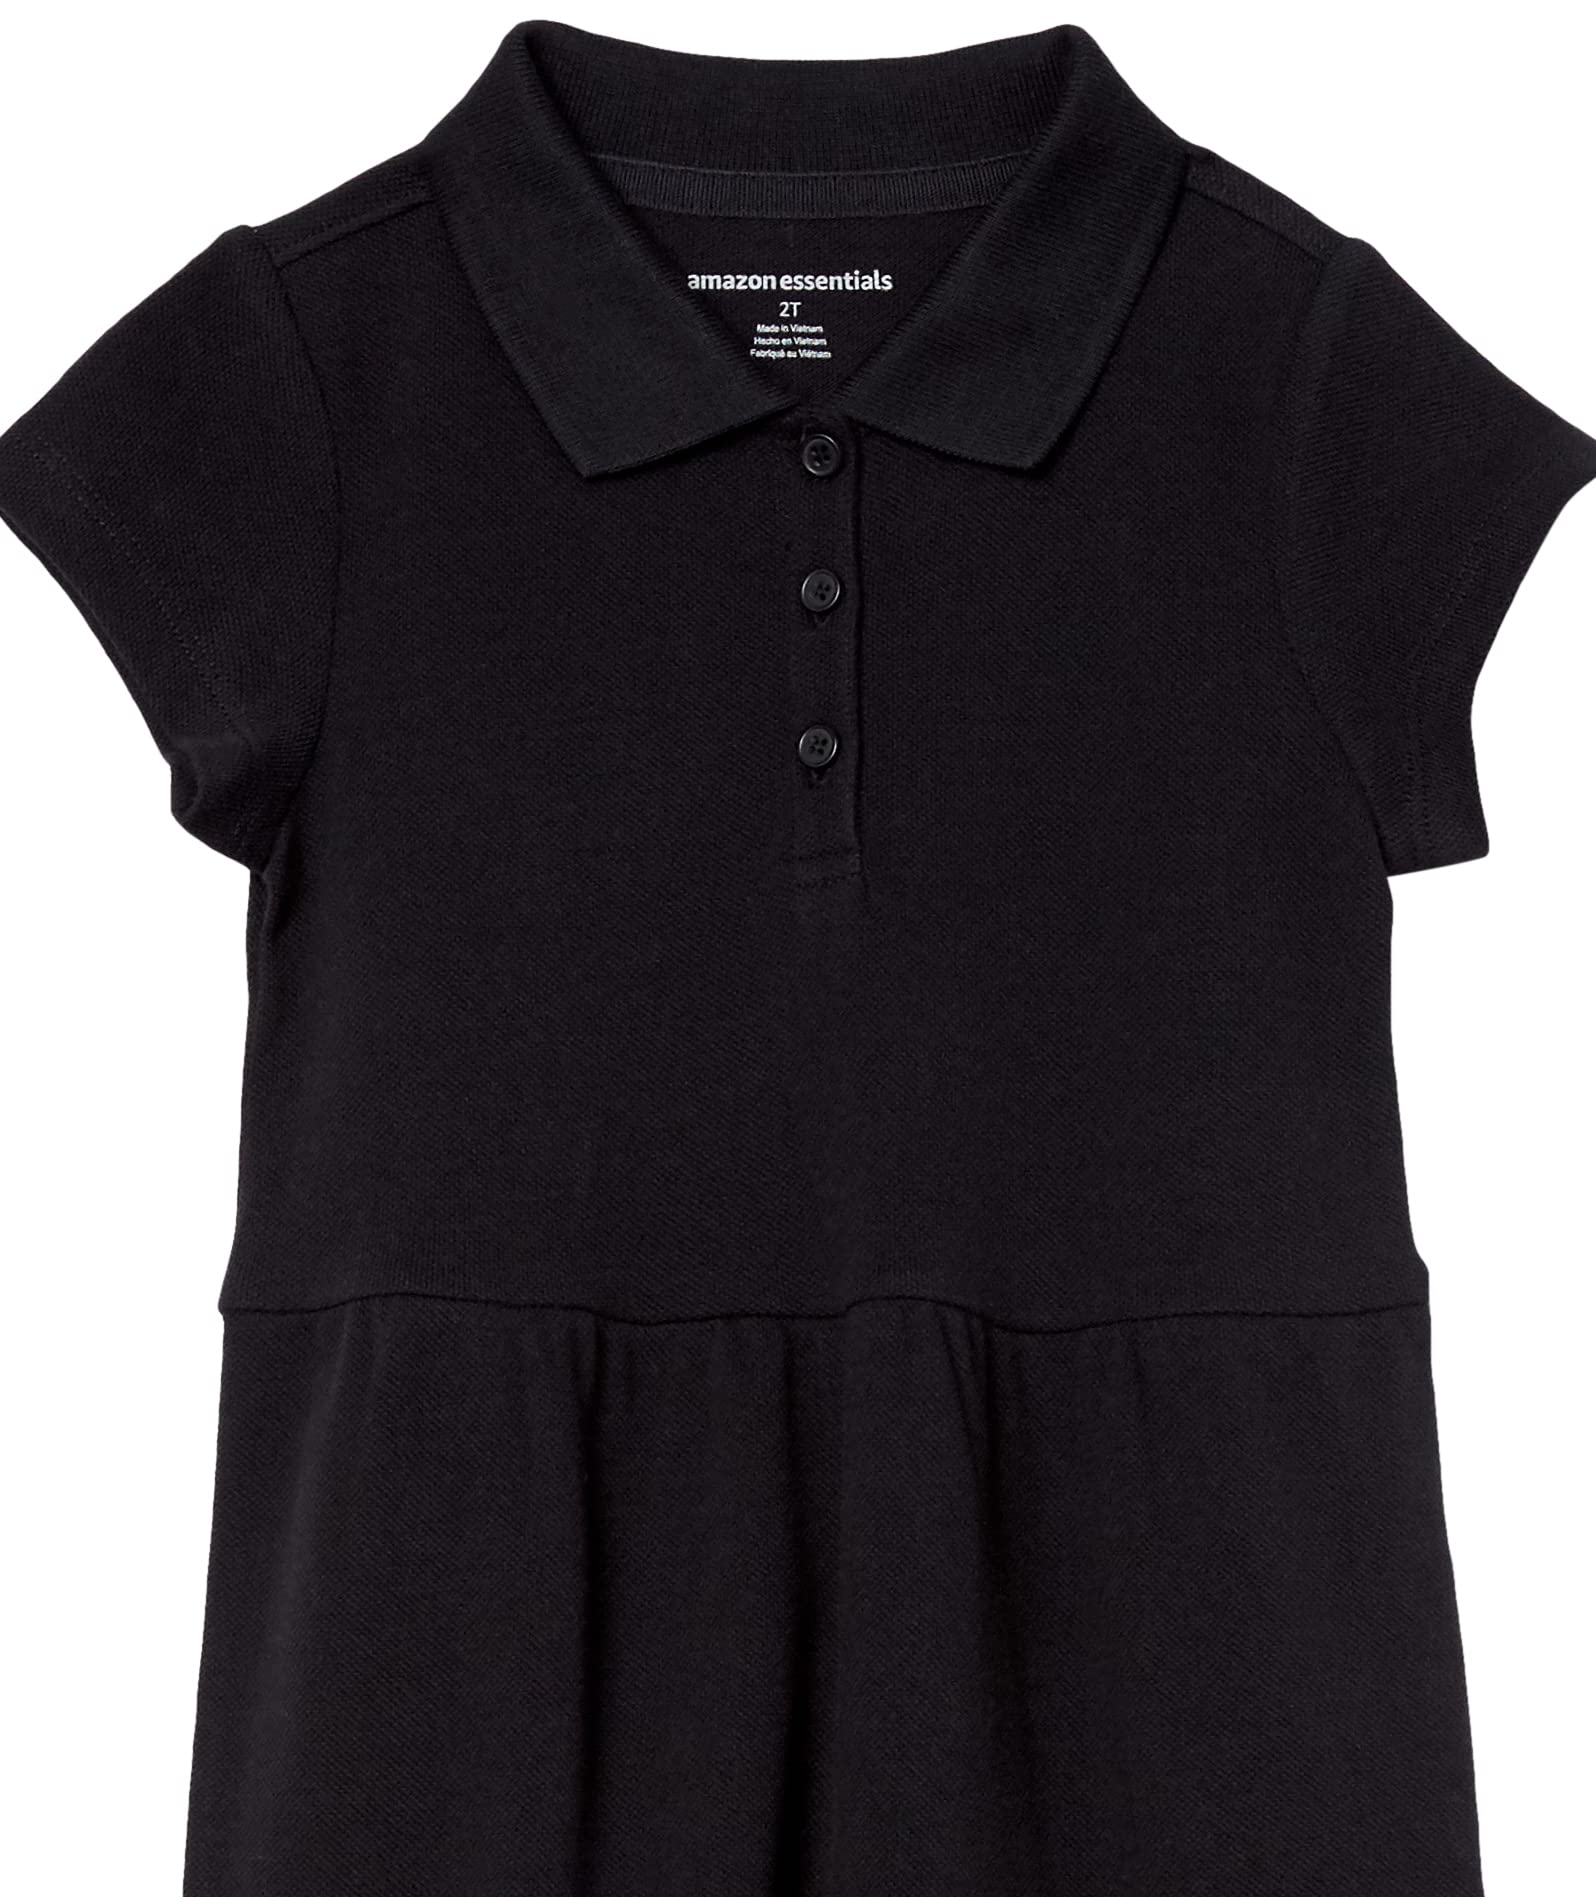 Amazon Essentials Girls and Toddlers' Short-Sleeve Uniform Pique Polo Dress, Multipacks